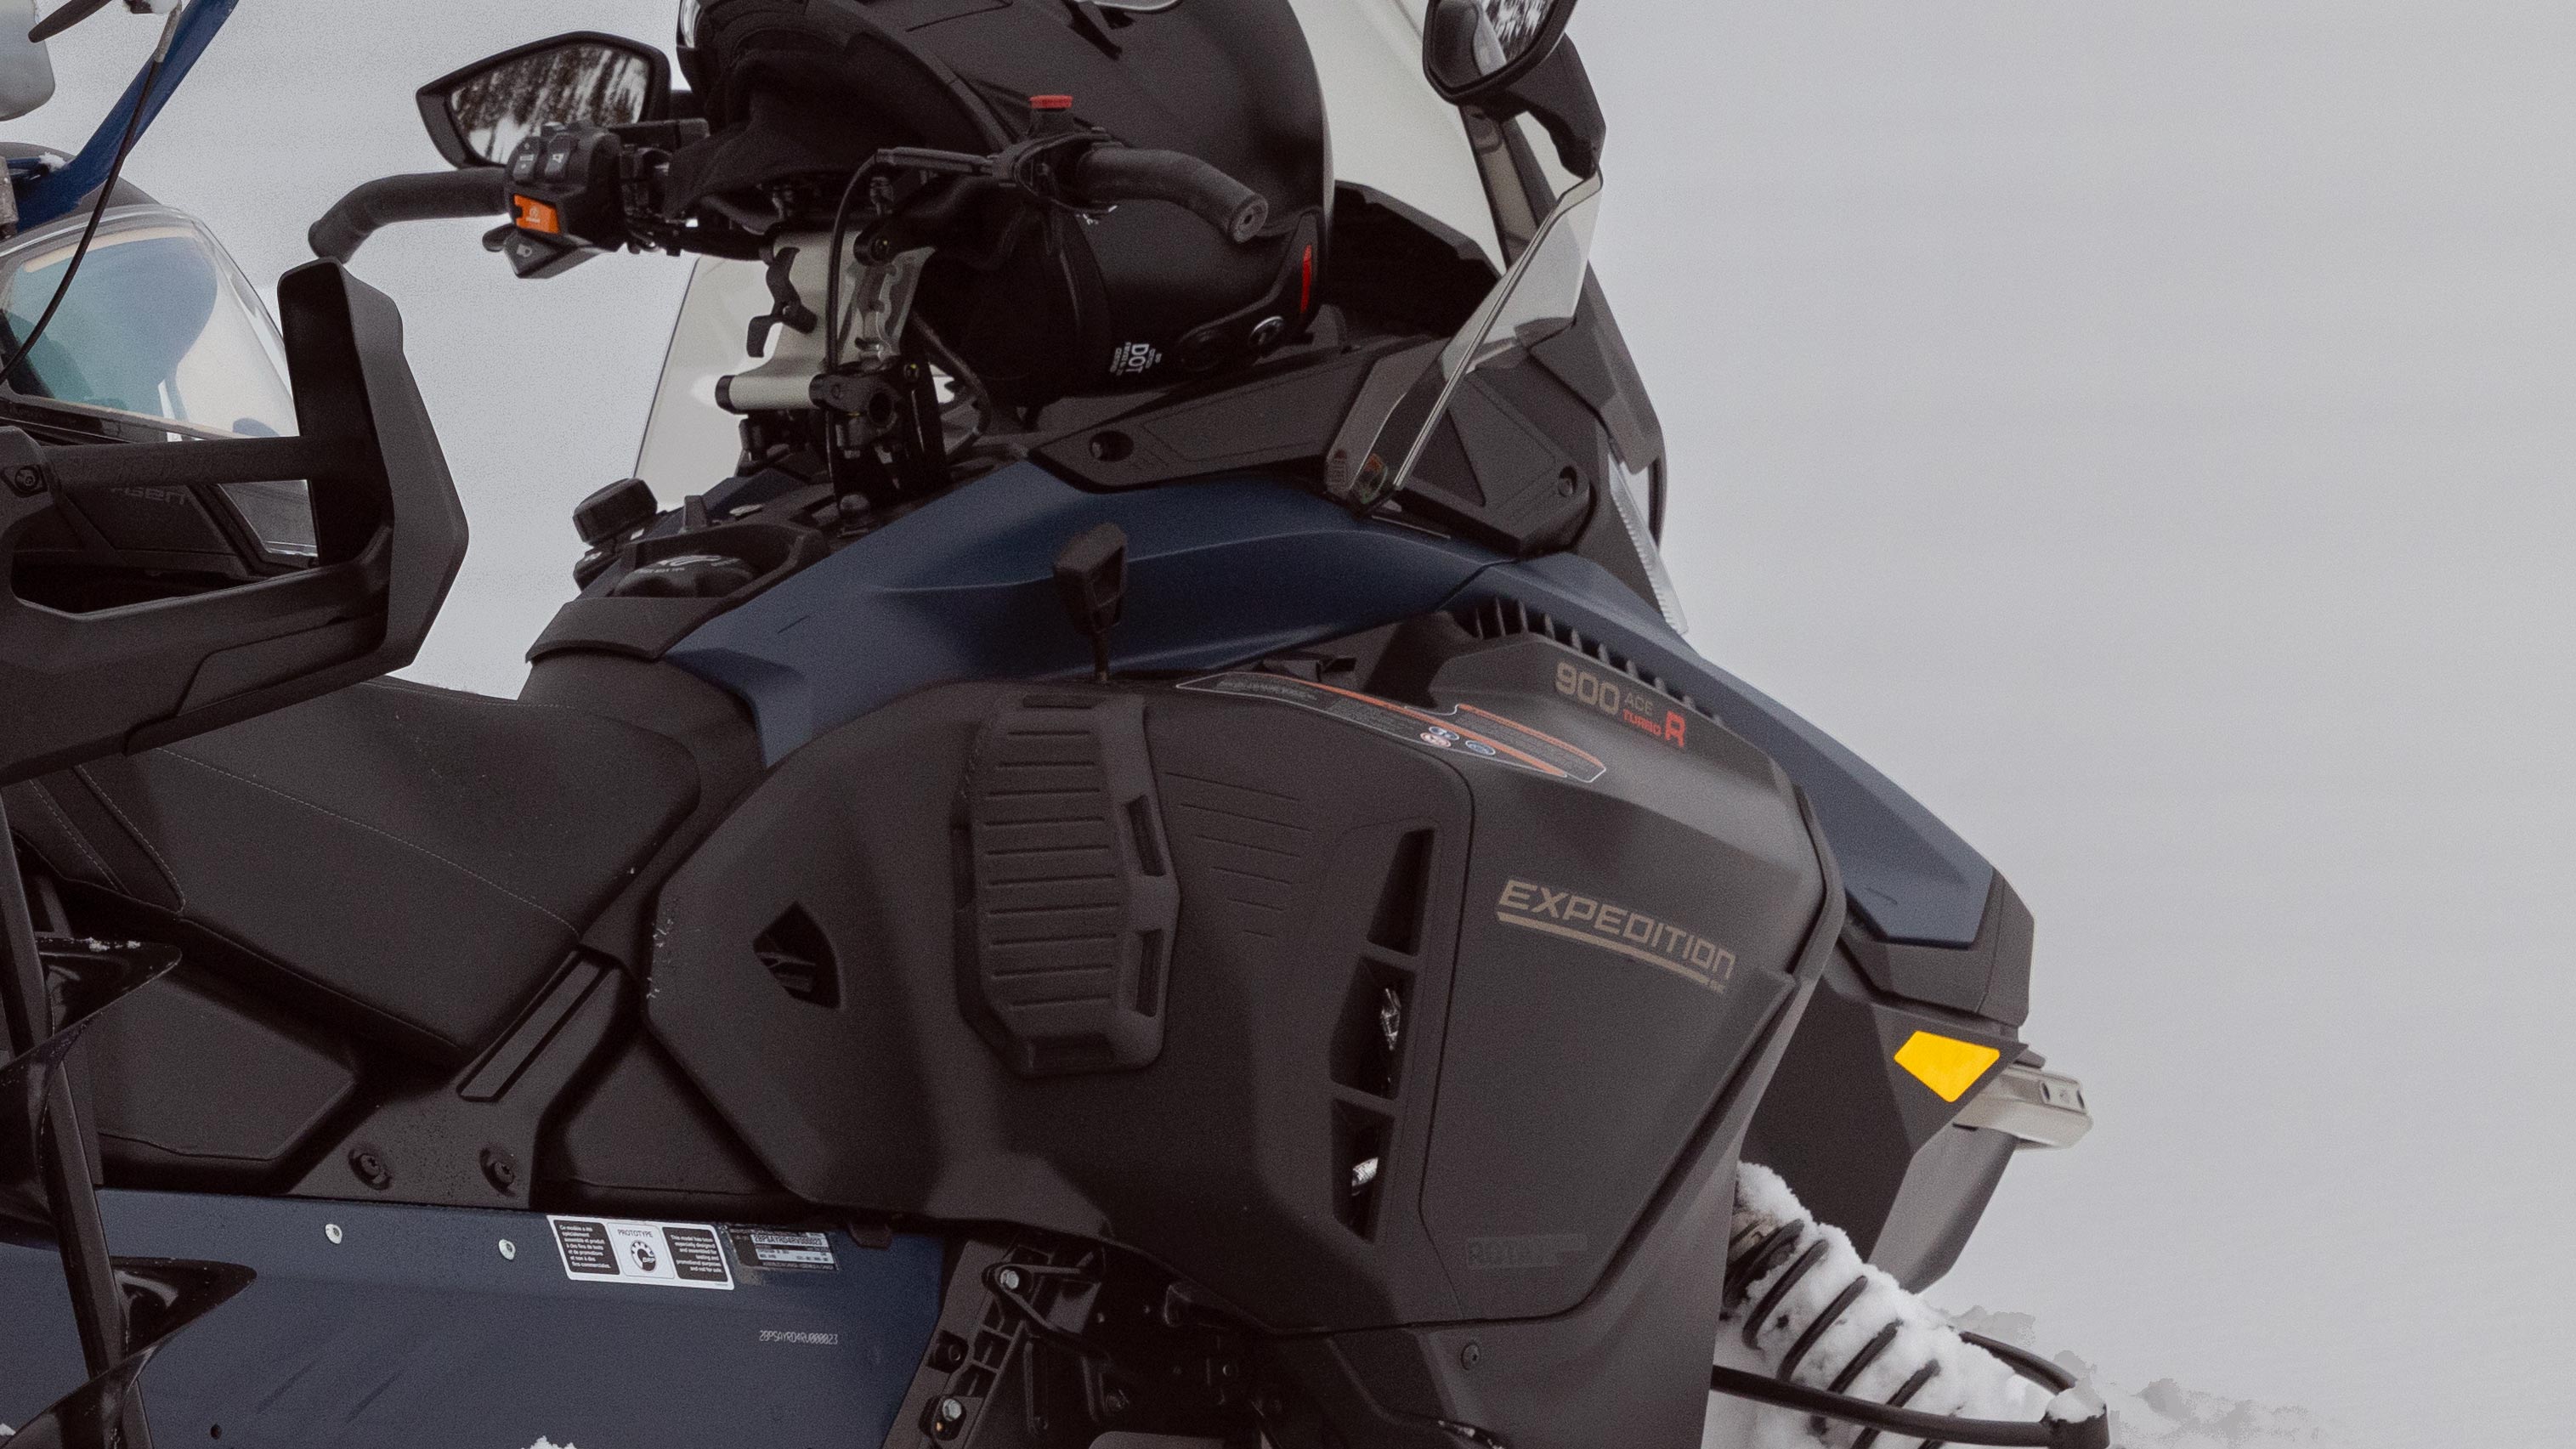 Knee pad protector installed on a 2025 Ski-Doo Expedition crossover snowmobile